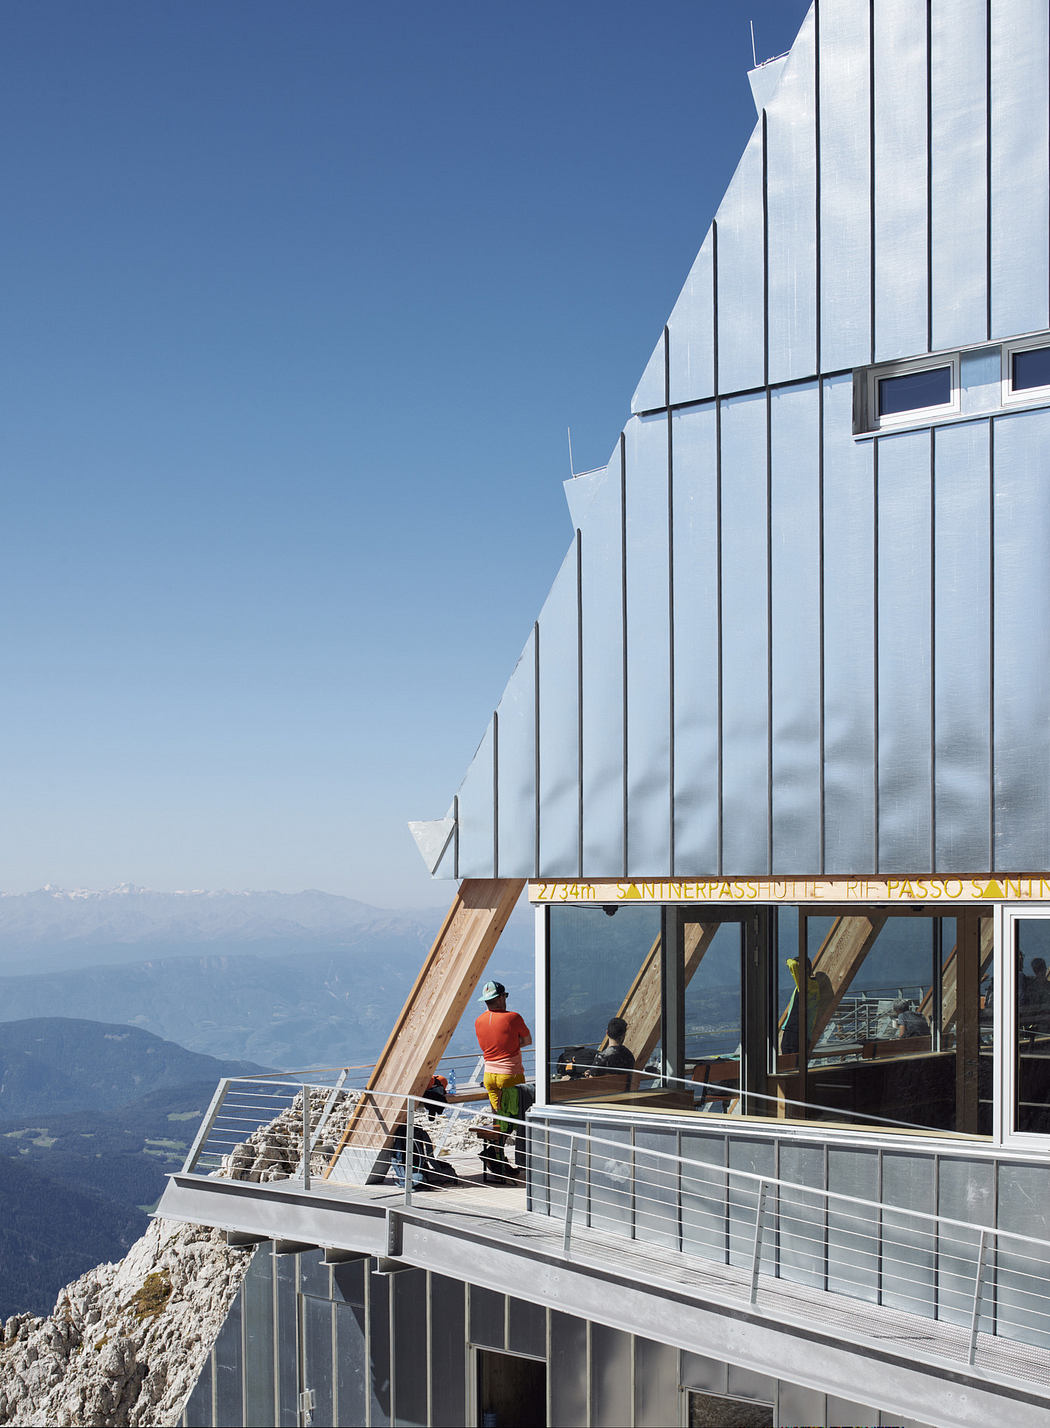 Modern mountain building with worker and panoramic view.